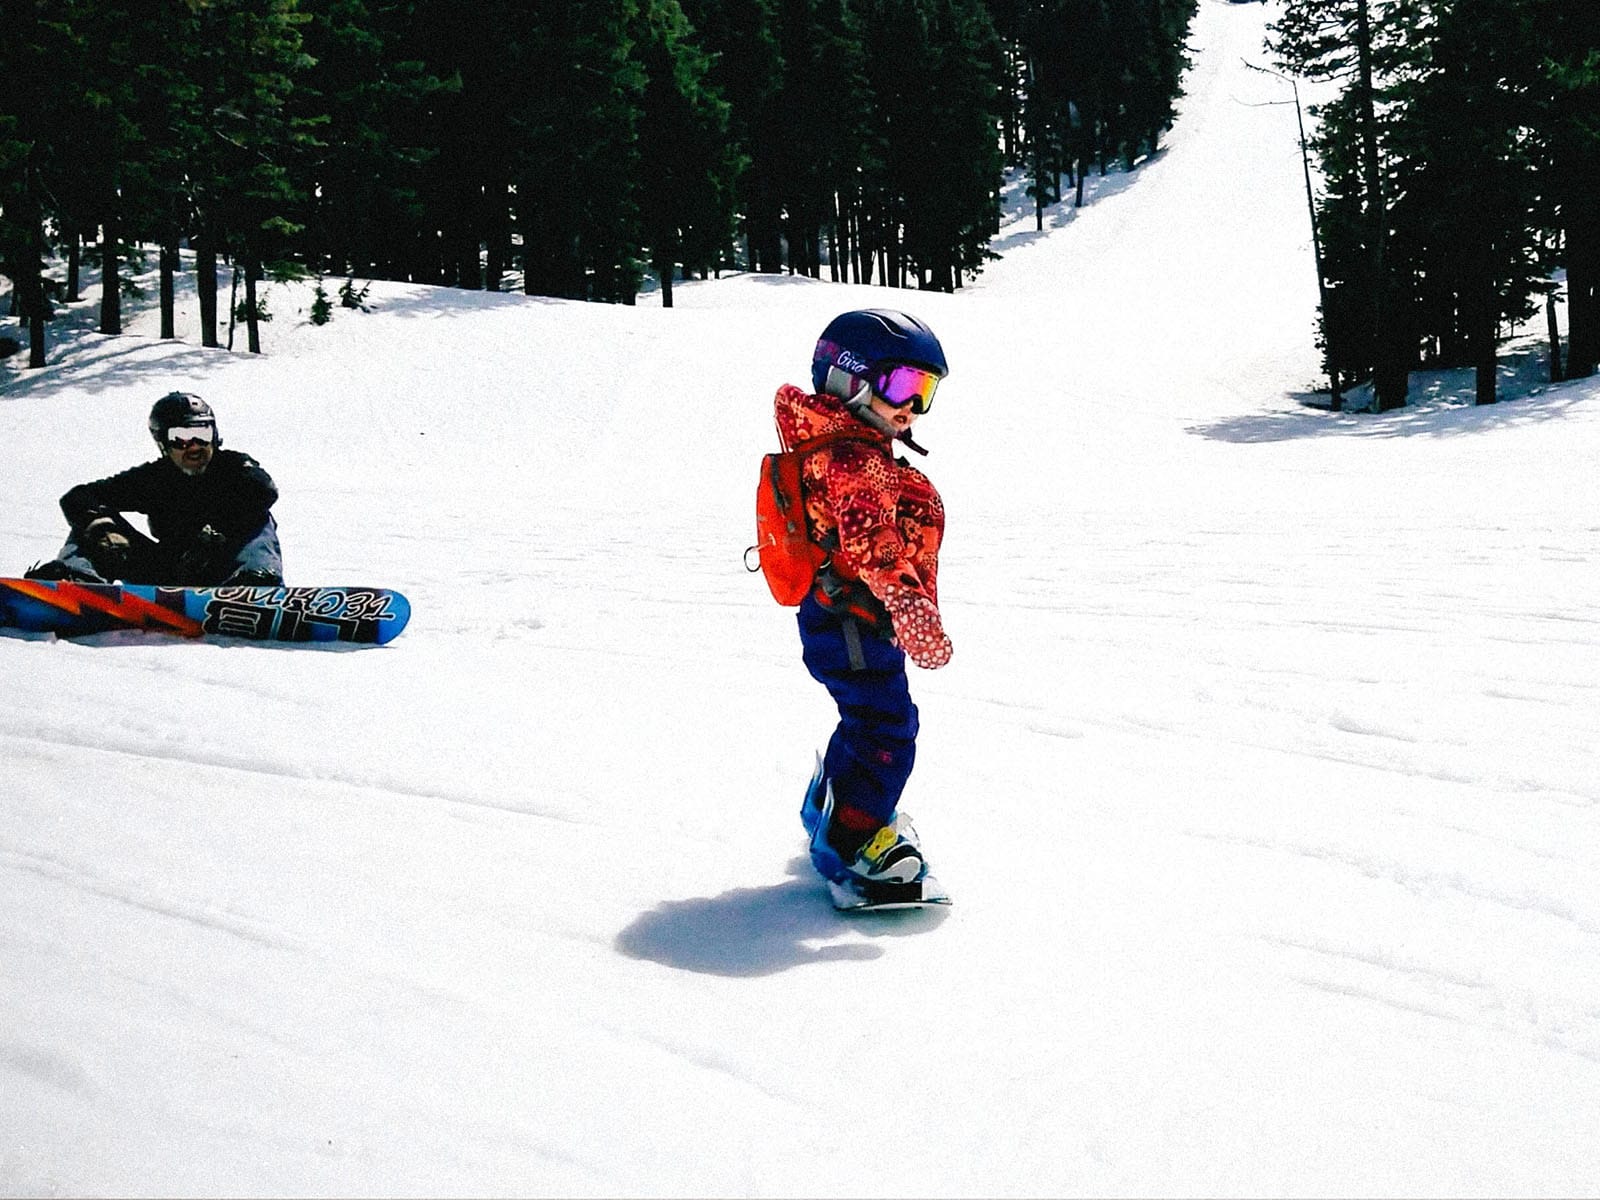 A 3-year-old learning how to snowboard independently